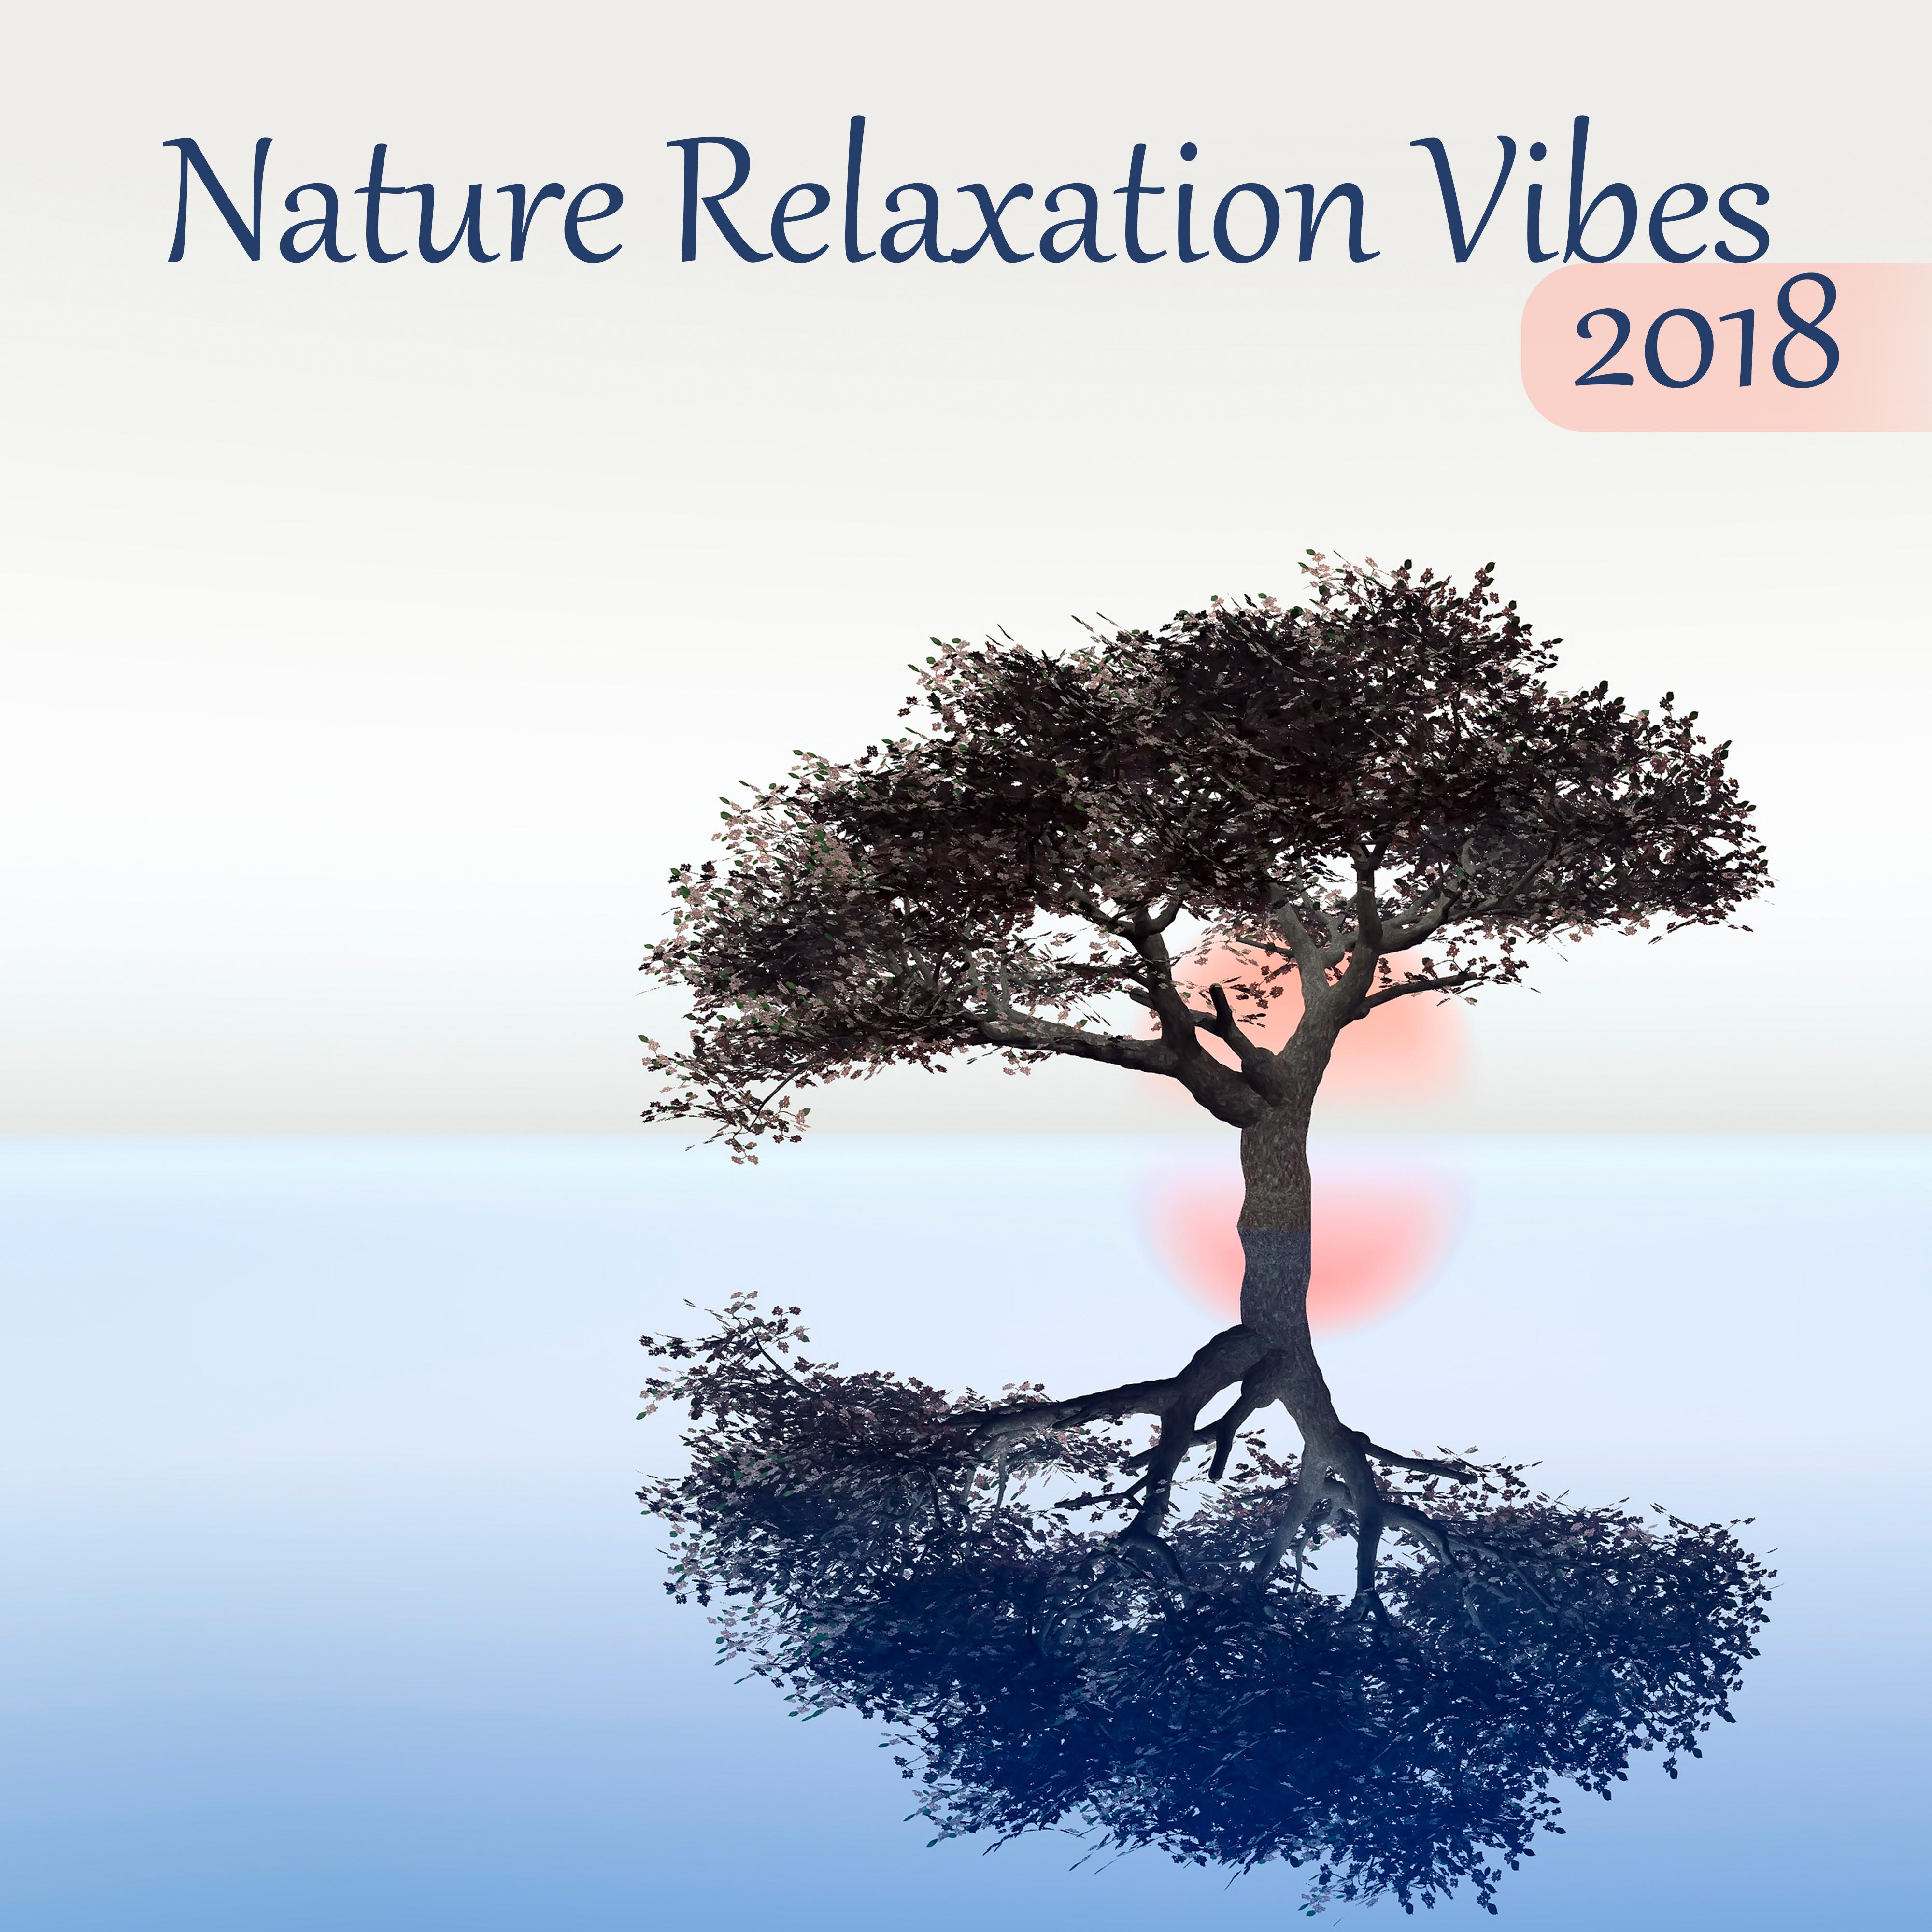 Nature Relaxation Vibes 2018